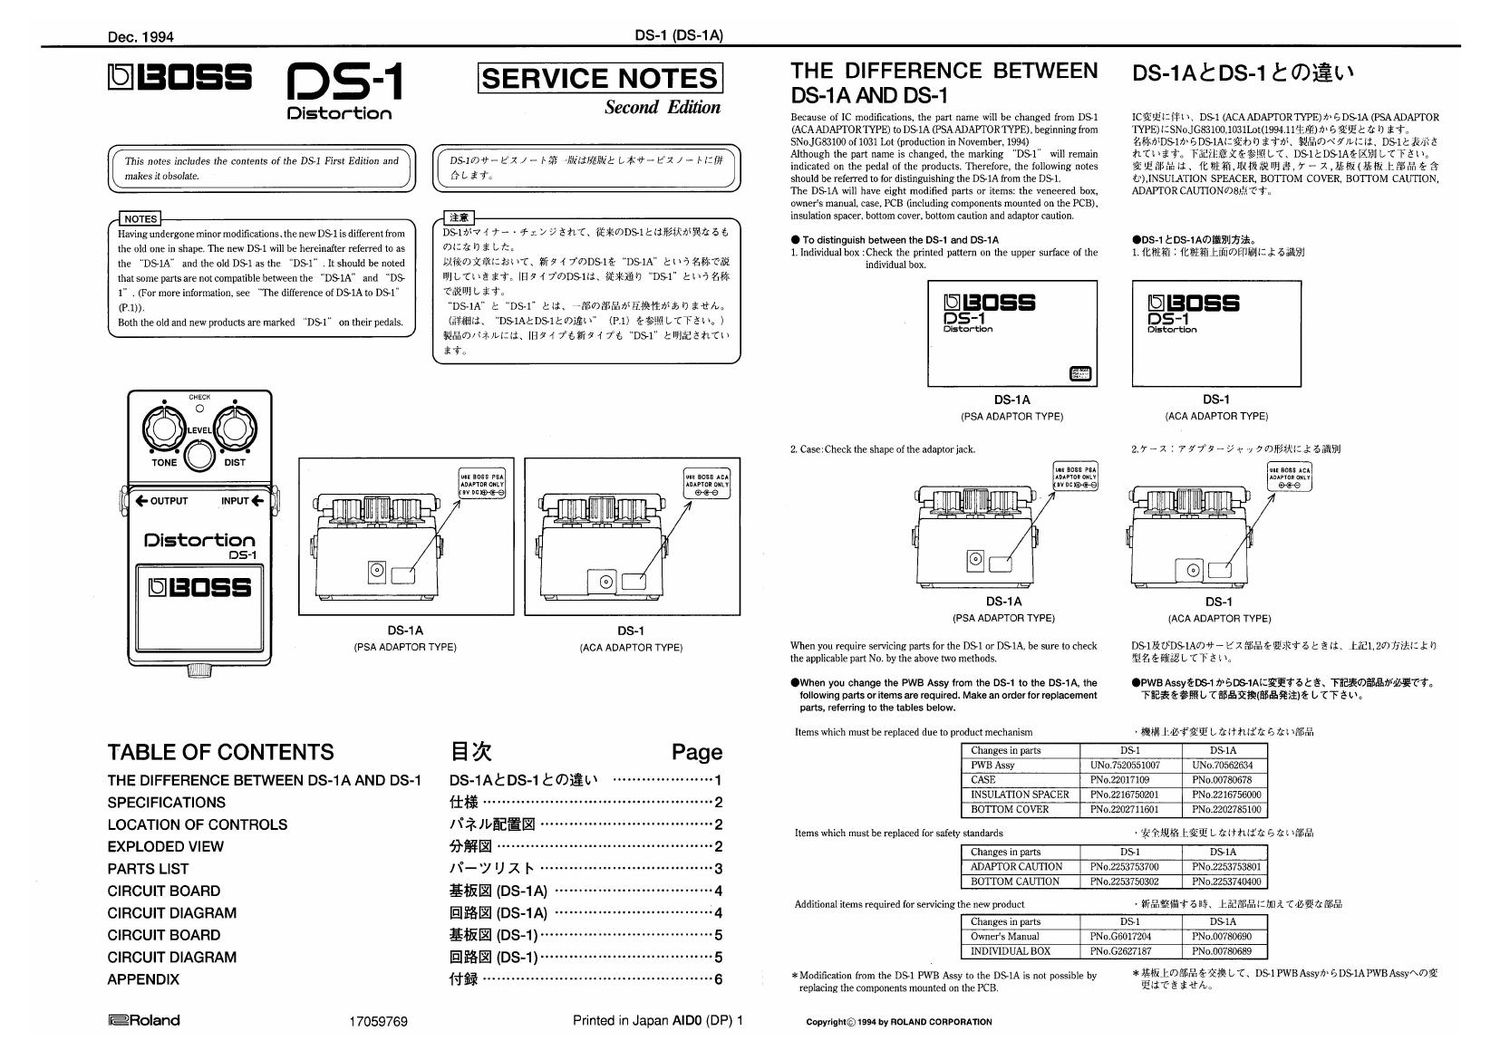 BOSS DS 1 SERVICE NOTES